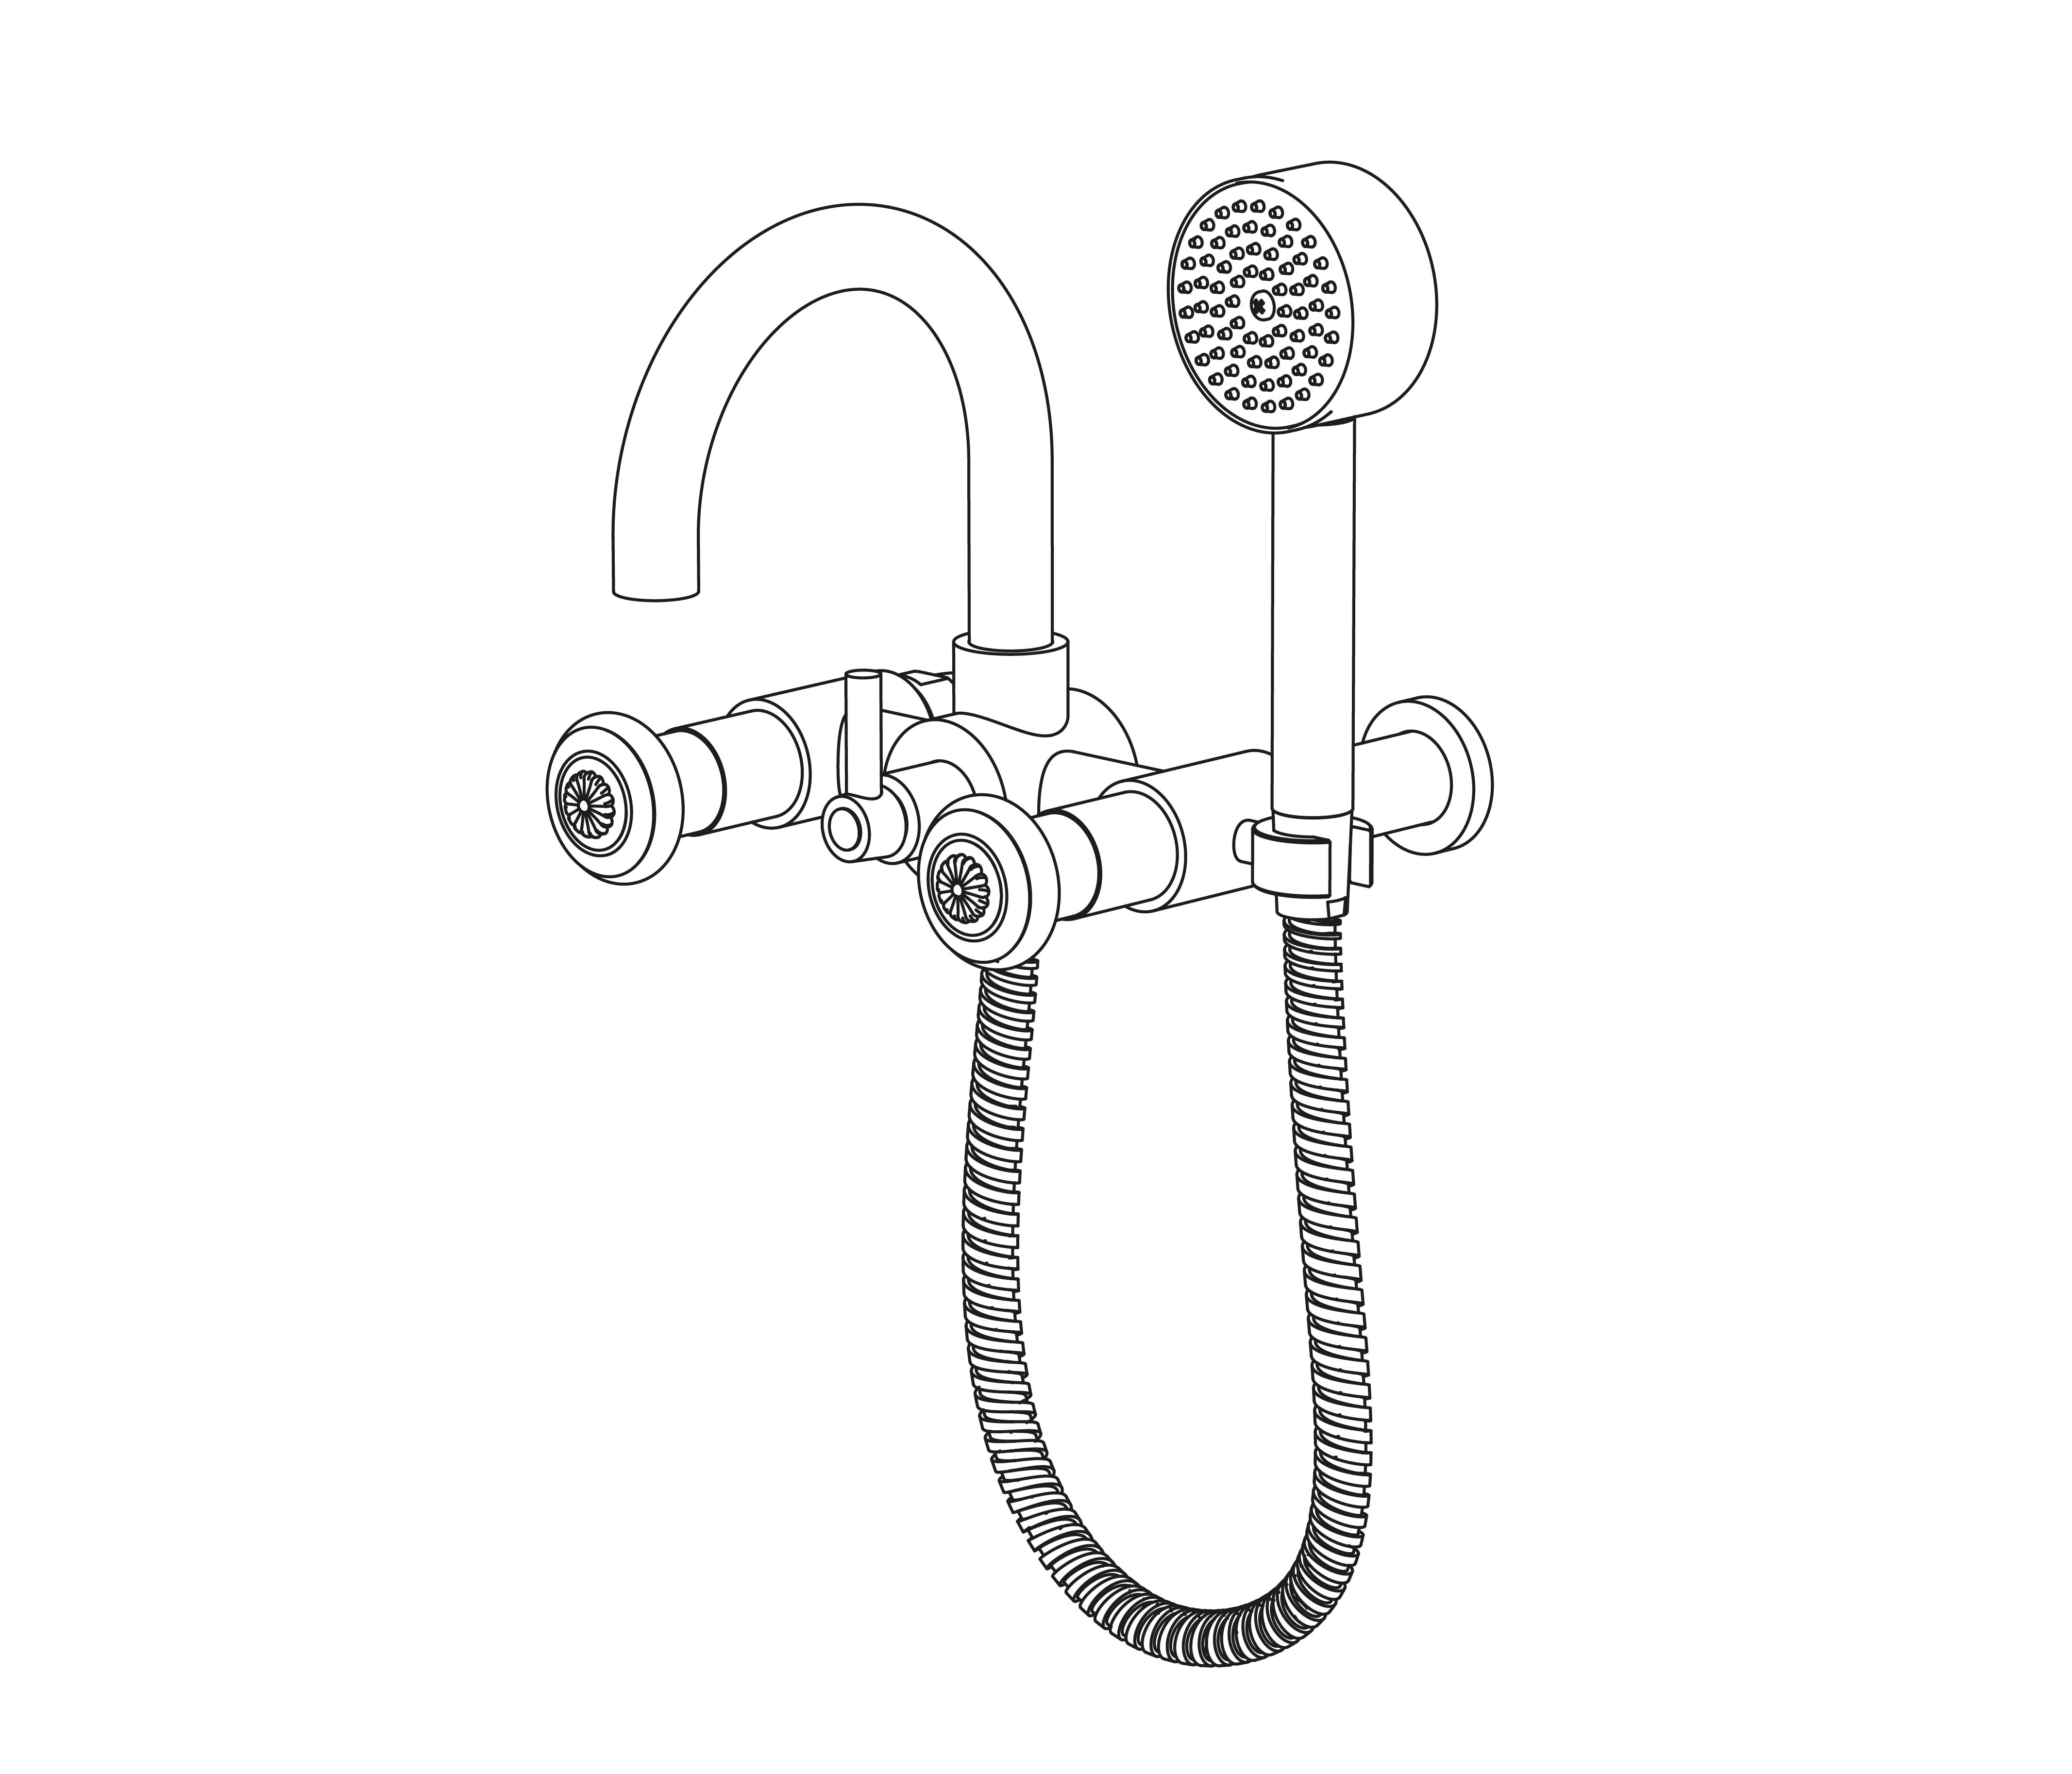 C36-3201 Wall mounted bath and shower mixer